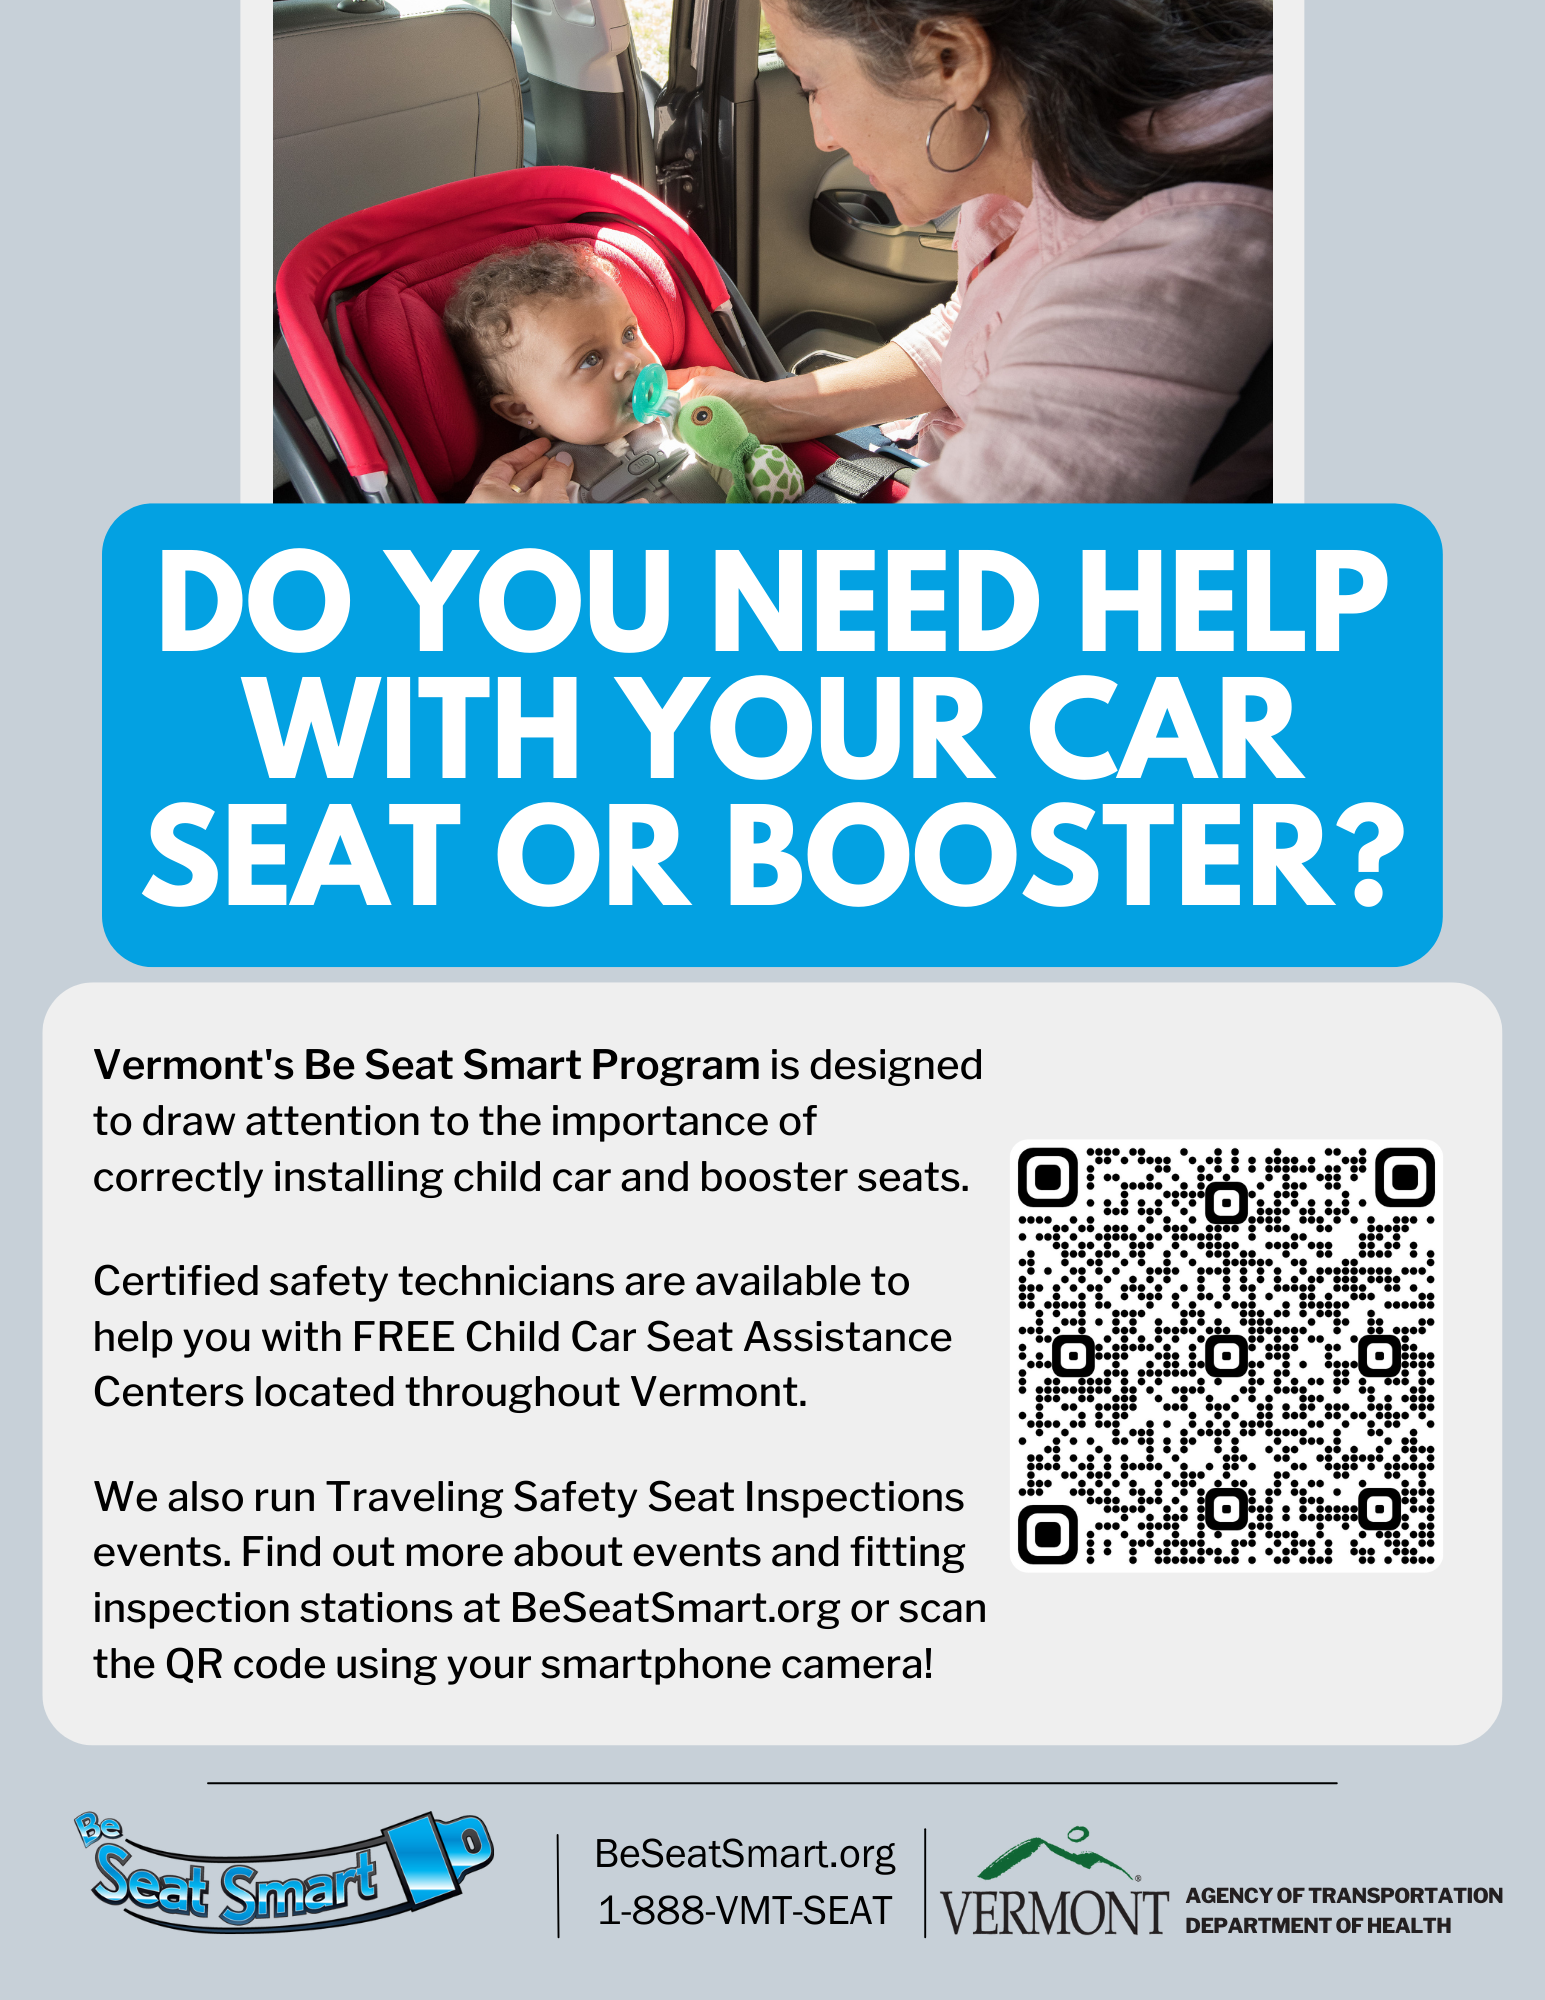  Be Seat Smart Poster. Woman putting child in car seat. text reads: do you need help with your car seat or booster? Vermont's Be Seat Smart Program is designed to draw attention to the importance of correctly installing child car and booster seats.  